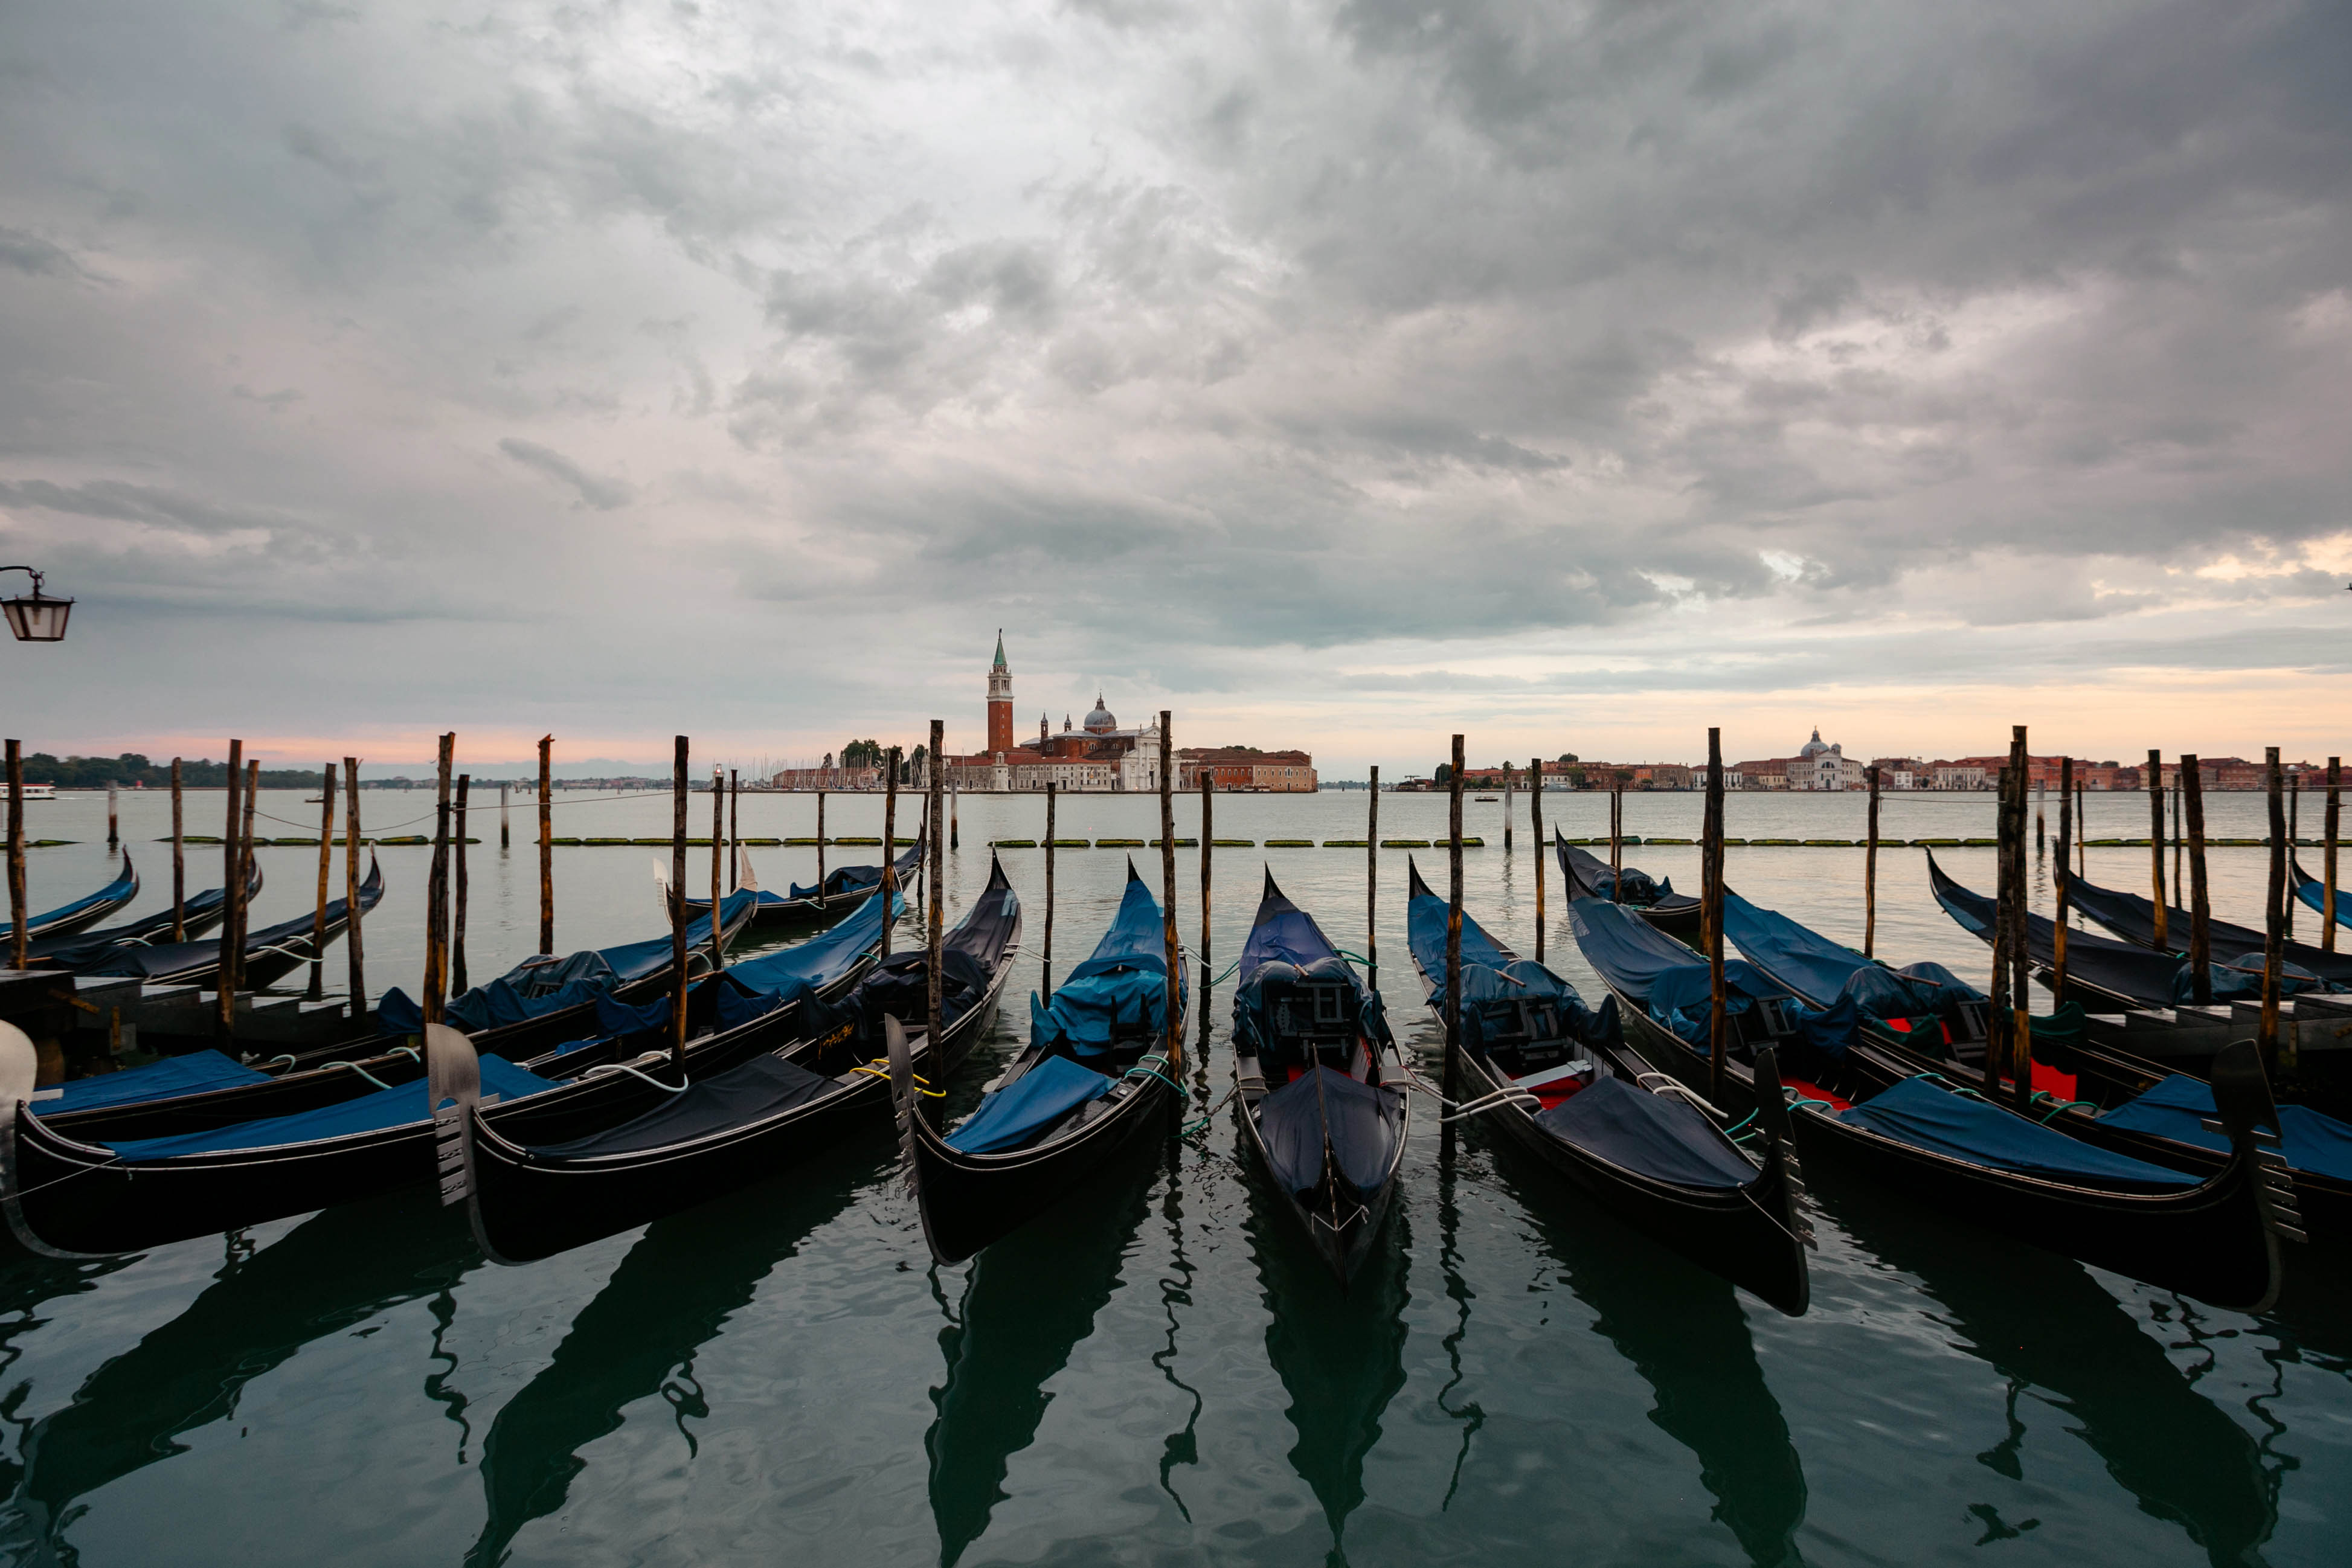 Yet there's also joy in finding beauty exactly where others before you have found it, as well. The hallmark symbol of Venice is the gondola, and it's nearly impossible not to ride one as at least once as a tourist.